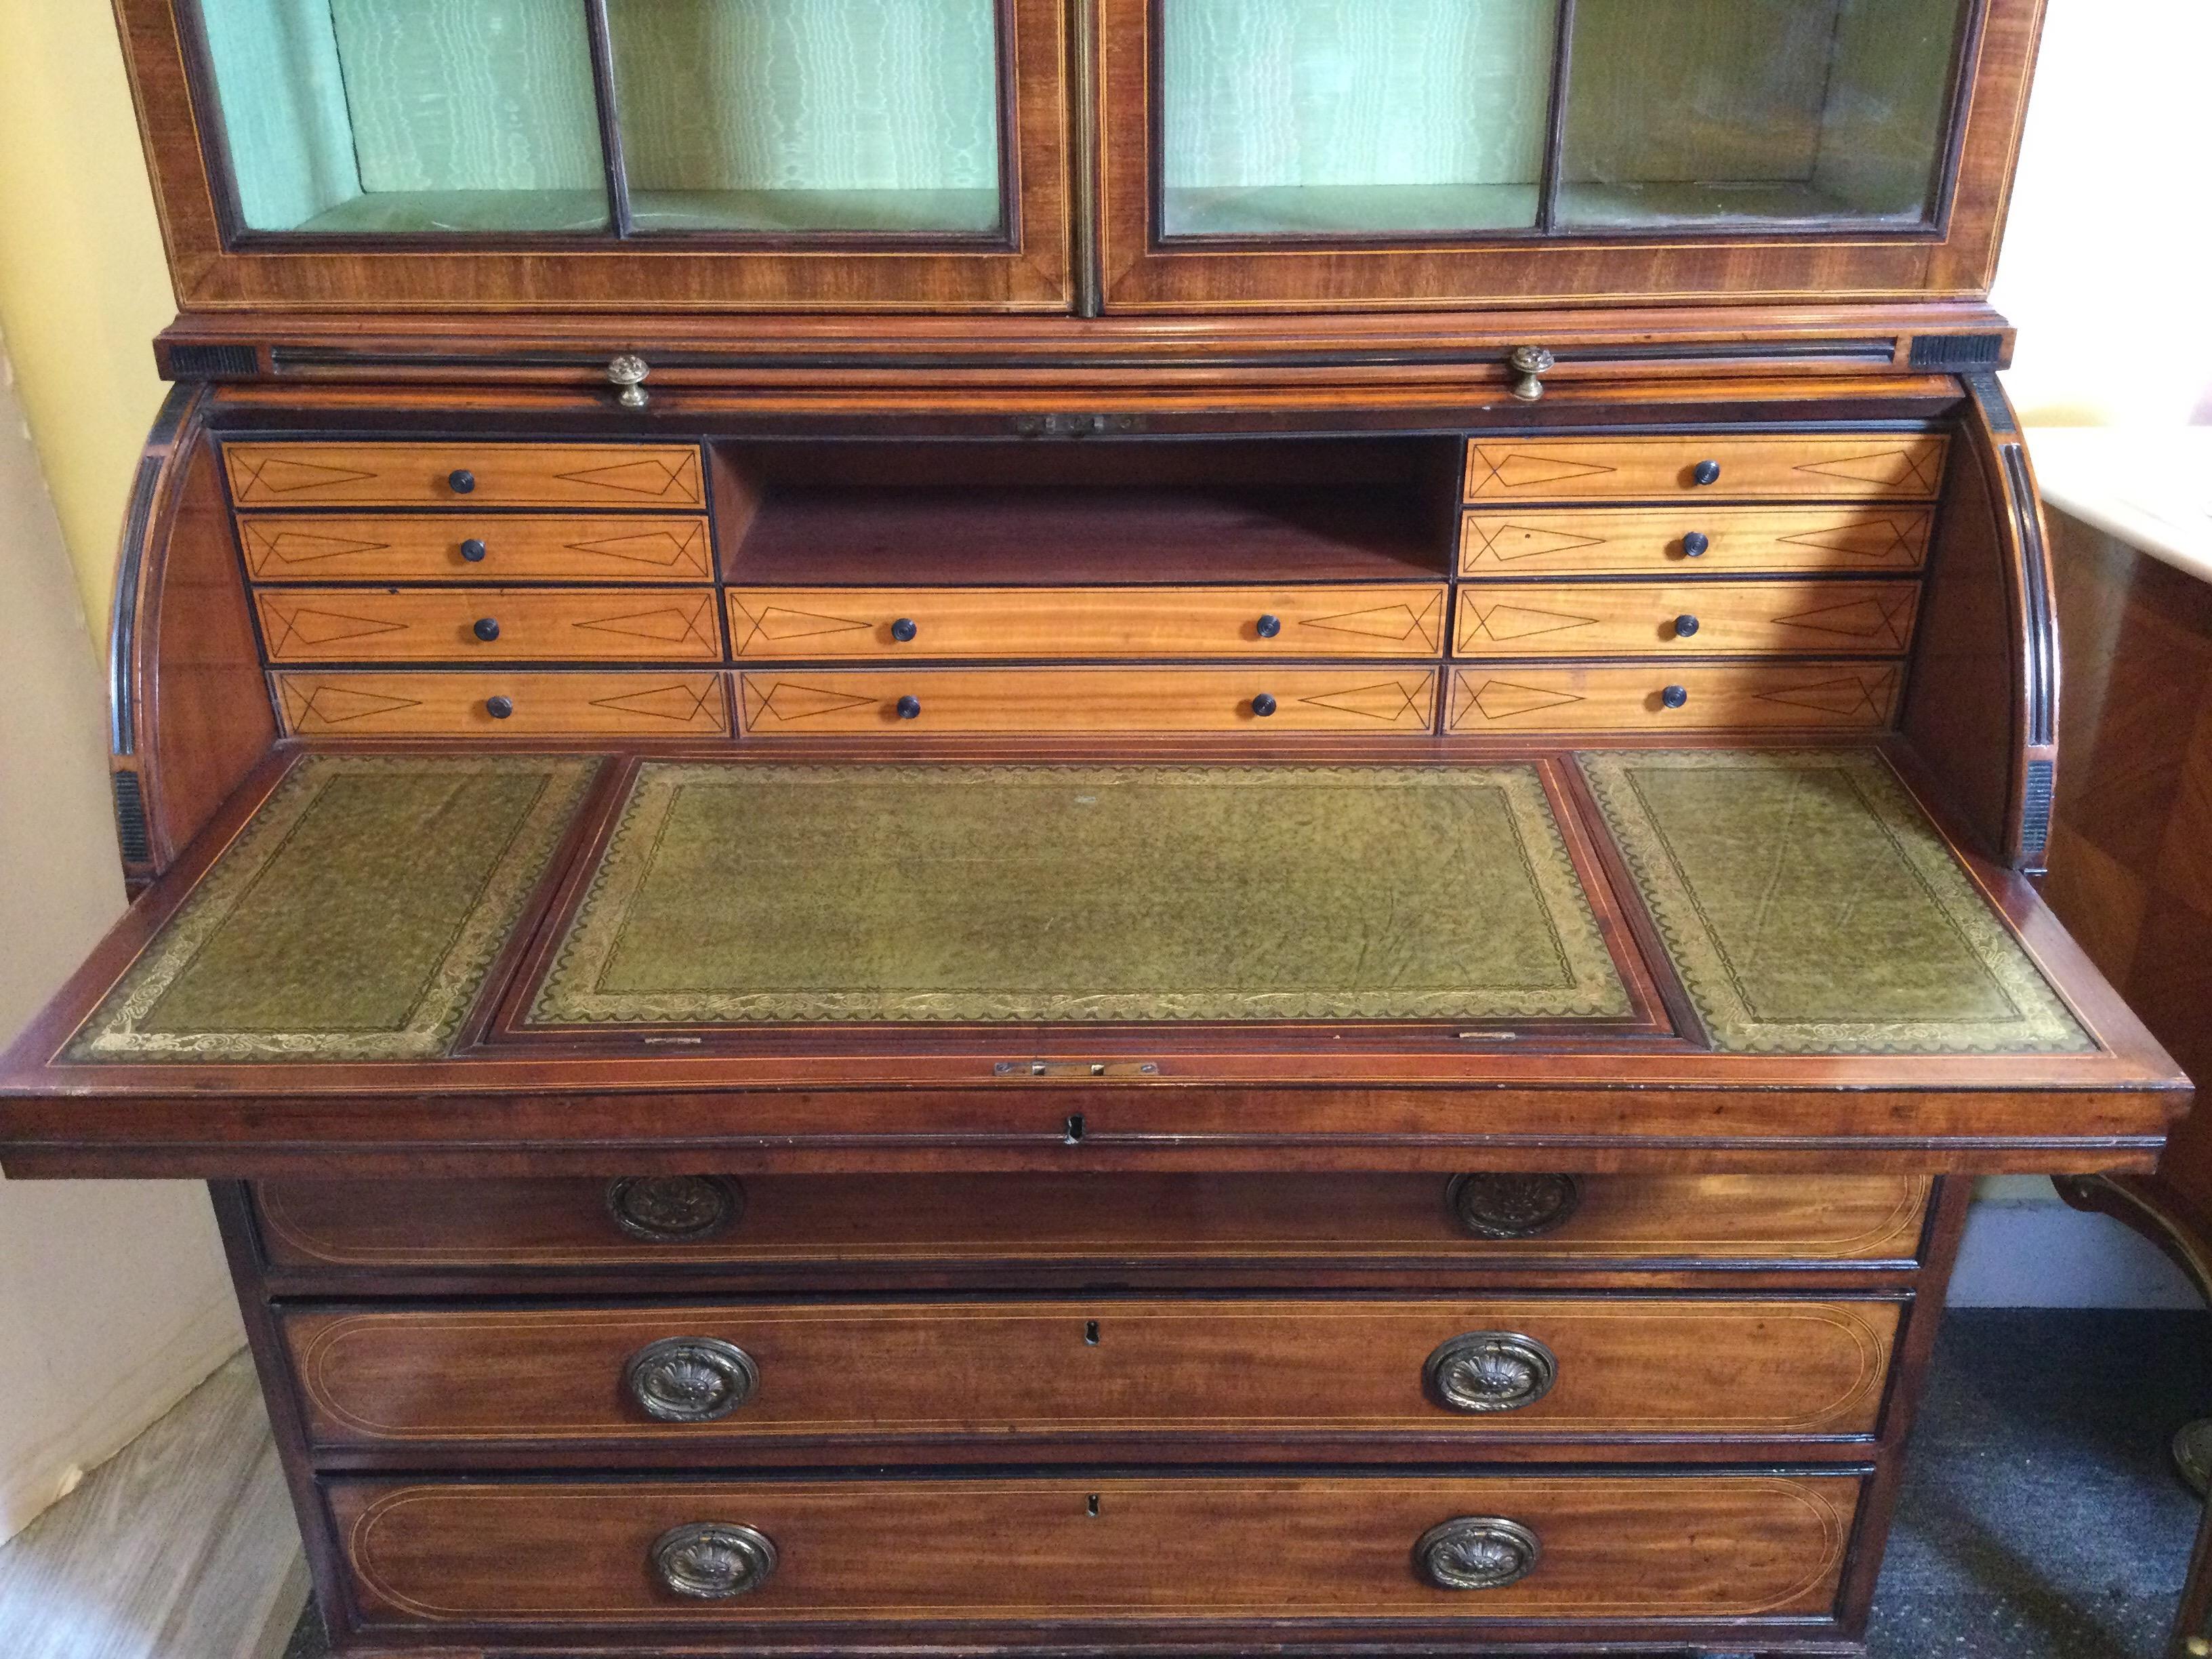 Mahogany Edwards and Roberts Antique Inlaid Secretary Desk, 1860-1875, London For Sale